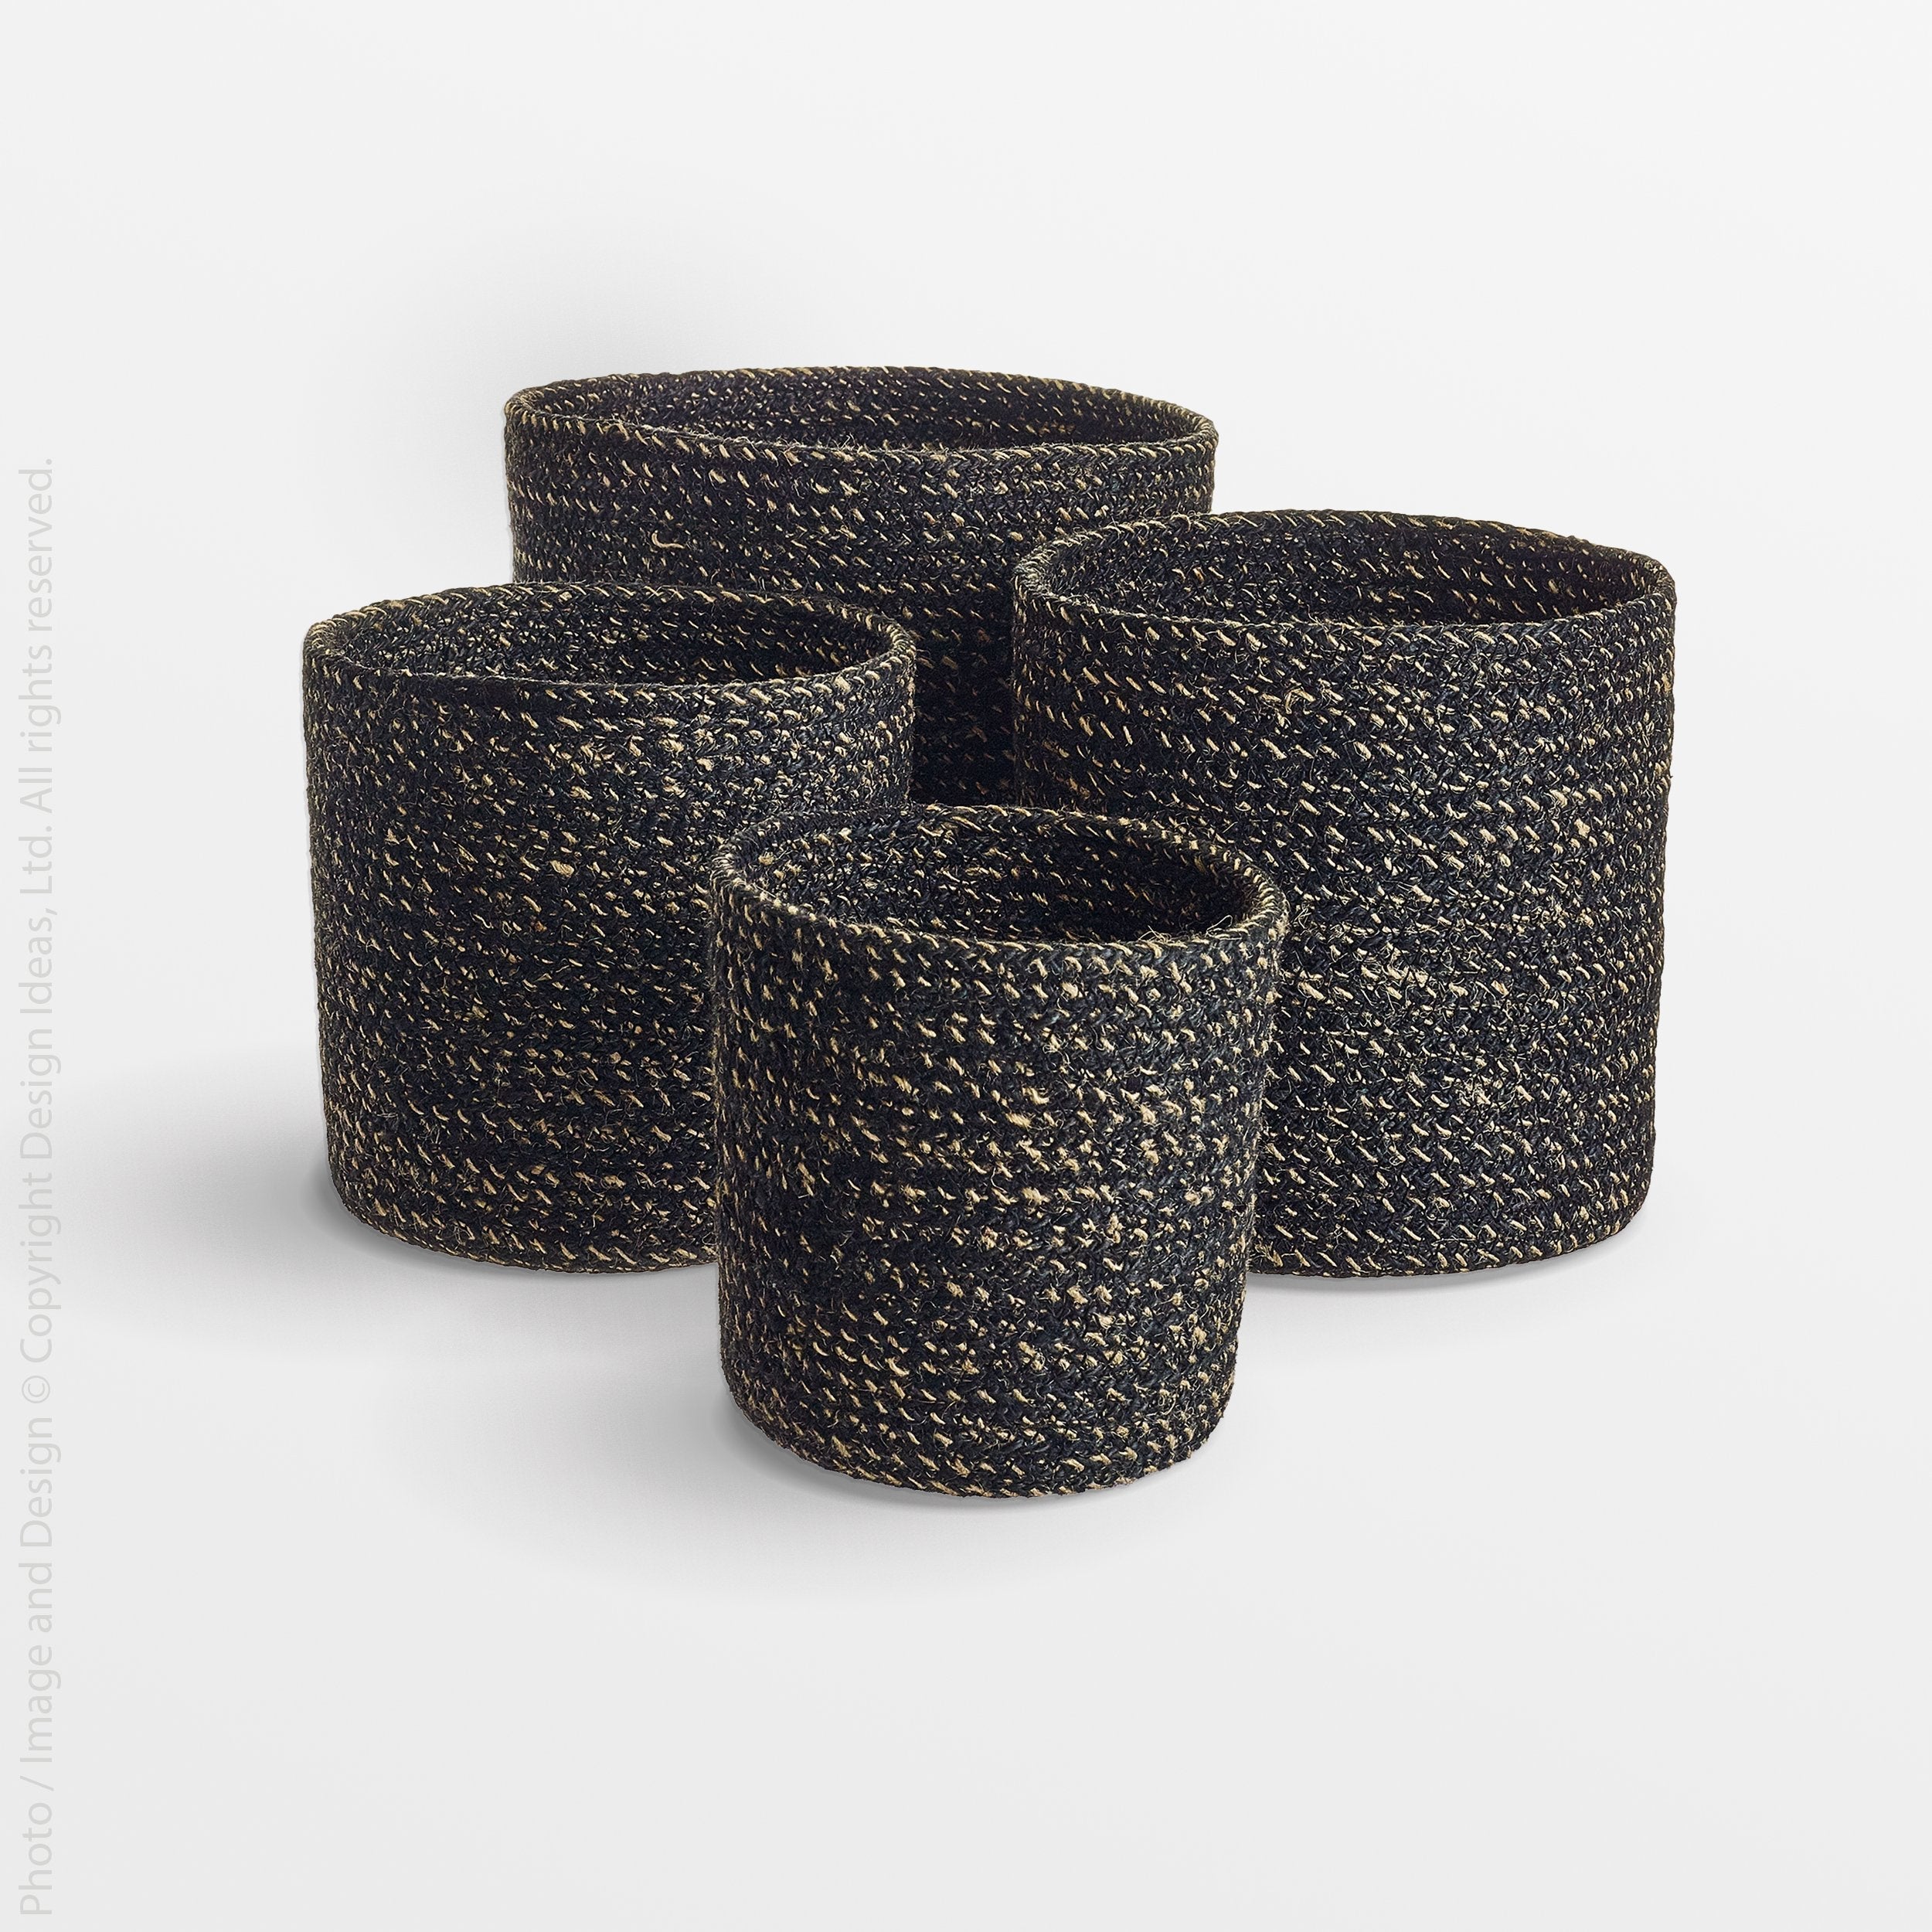 Melia™ baskets (set of 4) - Black | Image 10 | Premium Basket from the Melia collection | made with Jute for long lasting use | texxture